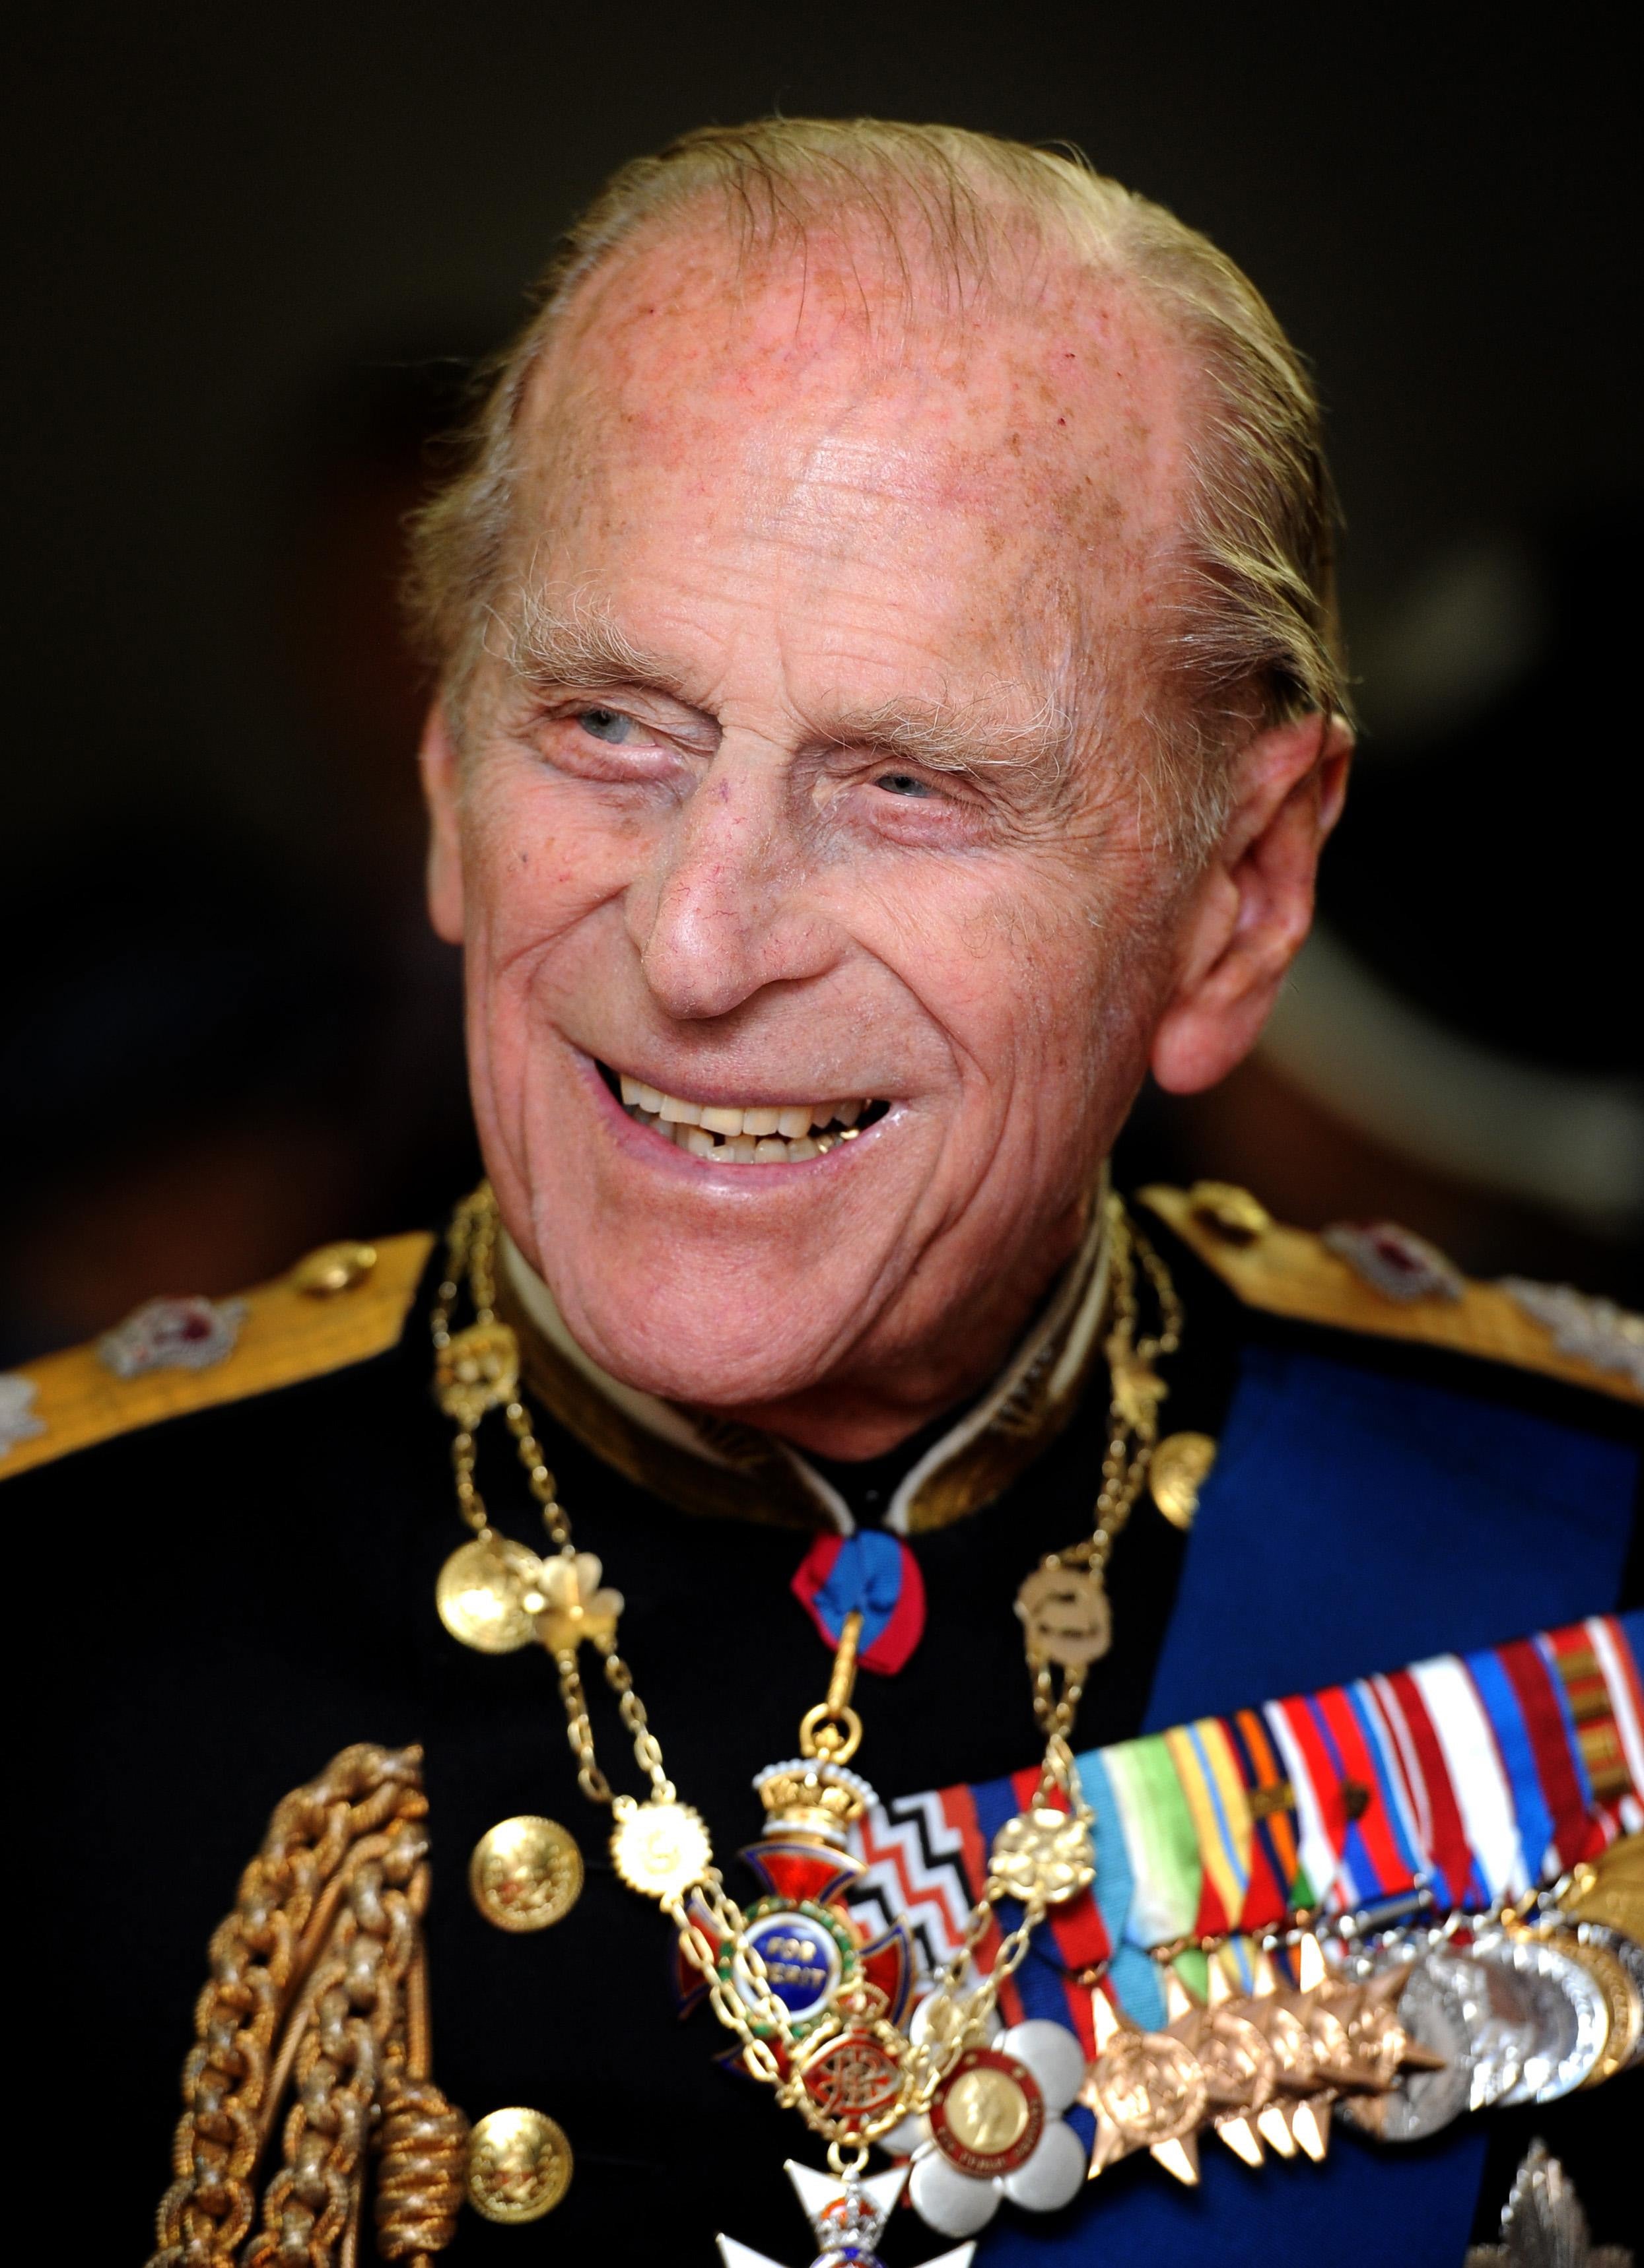 A naval uniform worn by the Duke of Edinburgh and his admiral’s cap are to go on display for the first time on the first anniversary of his death (Anthony Devlin/PA)